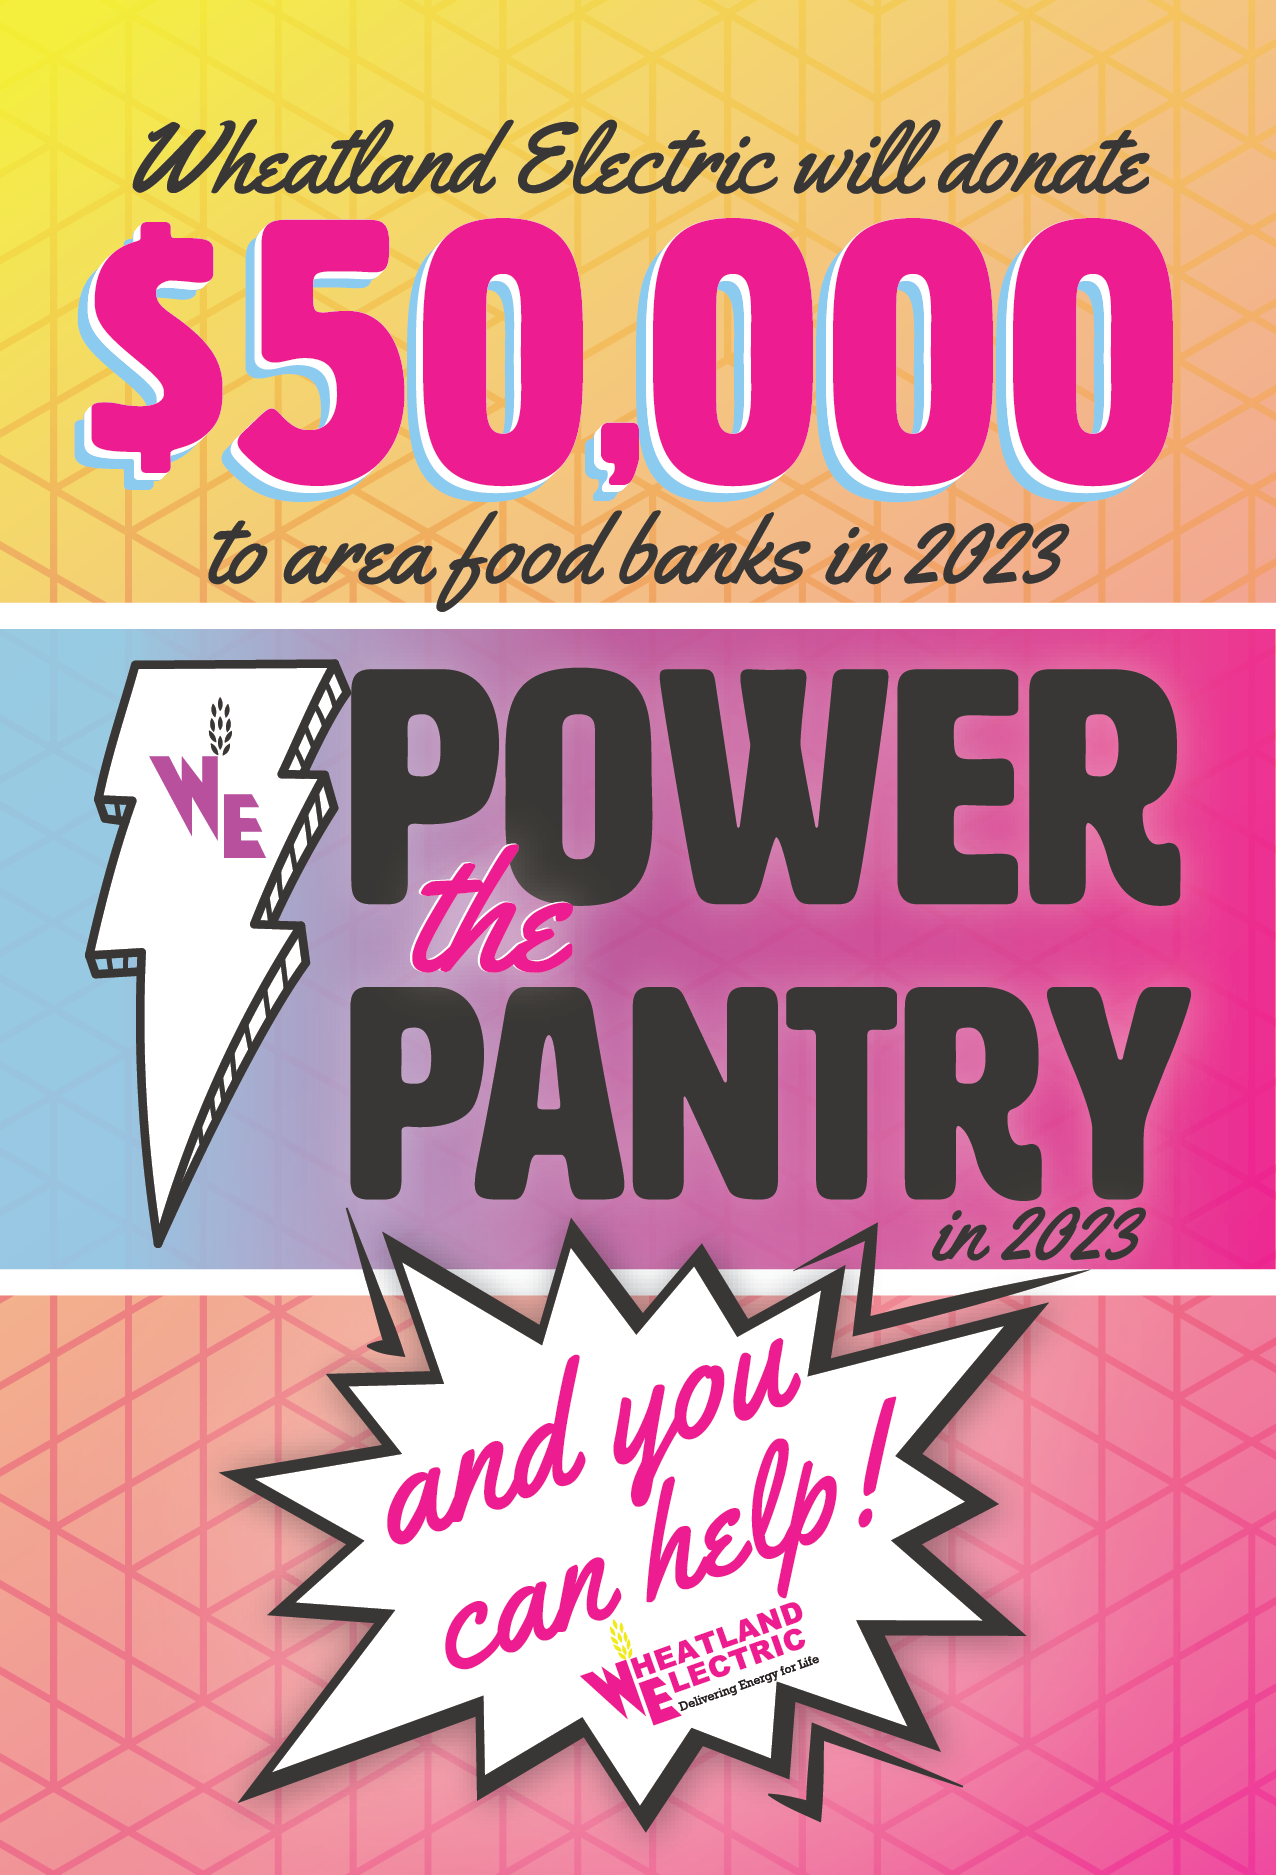 Help us POWER the Pantry!